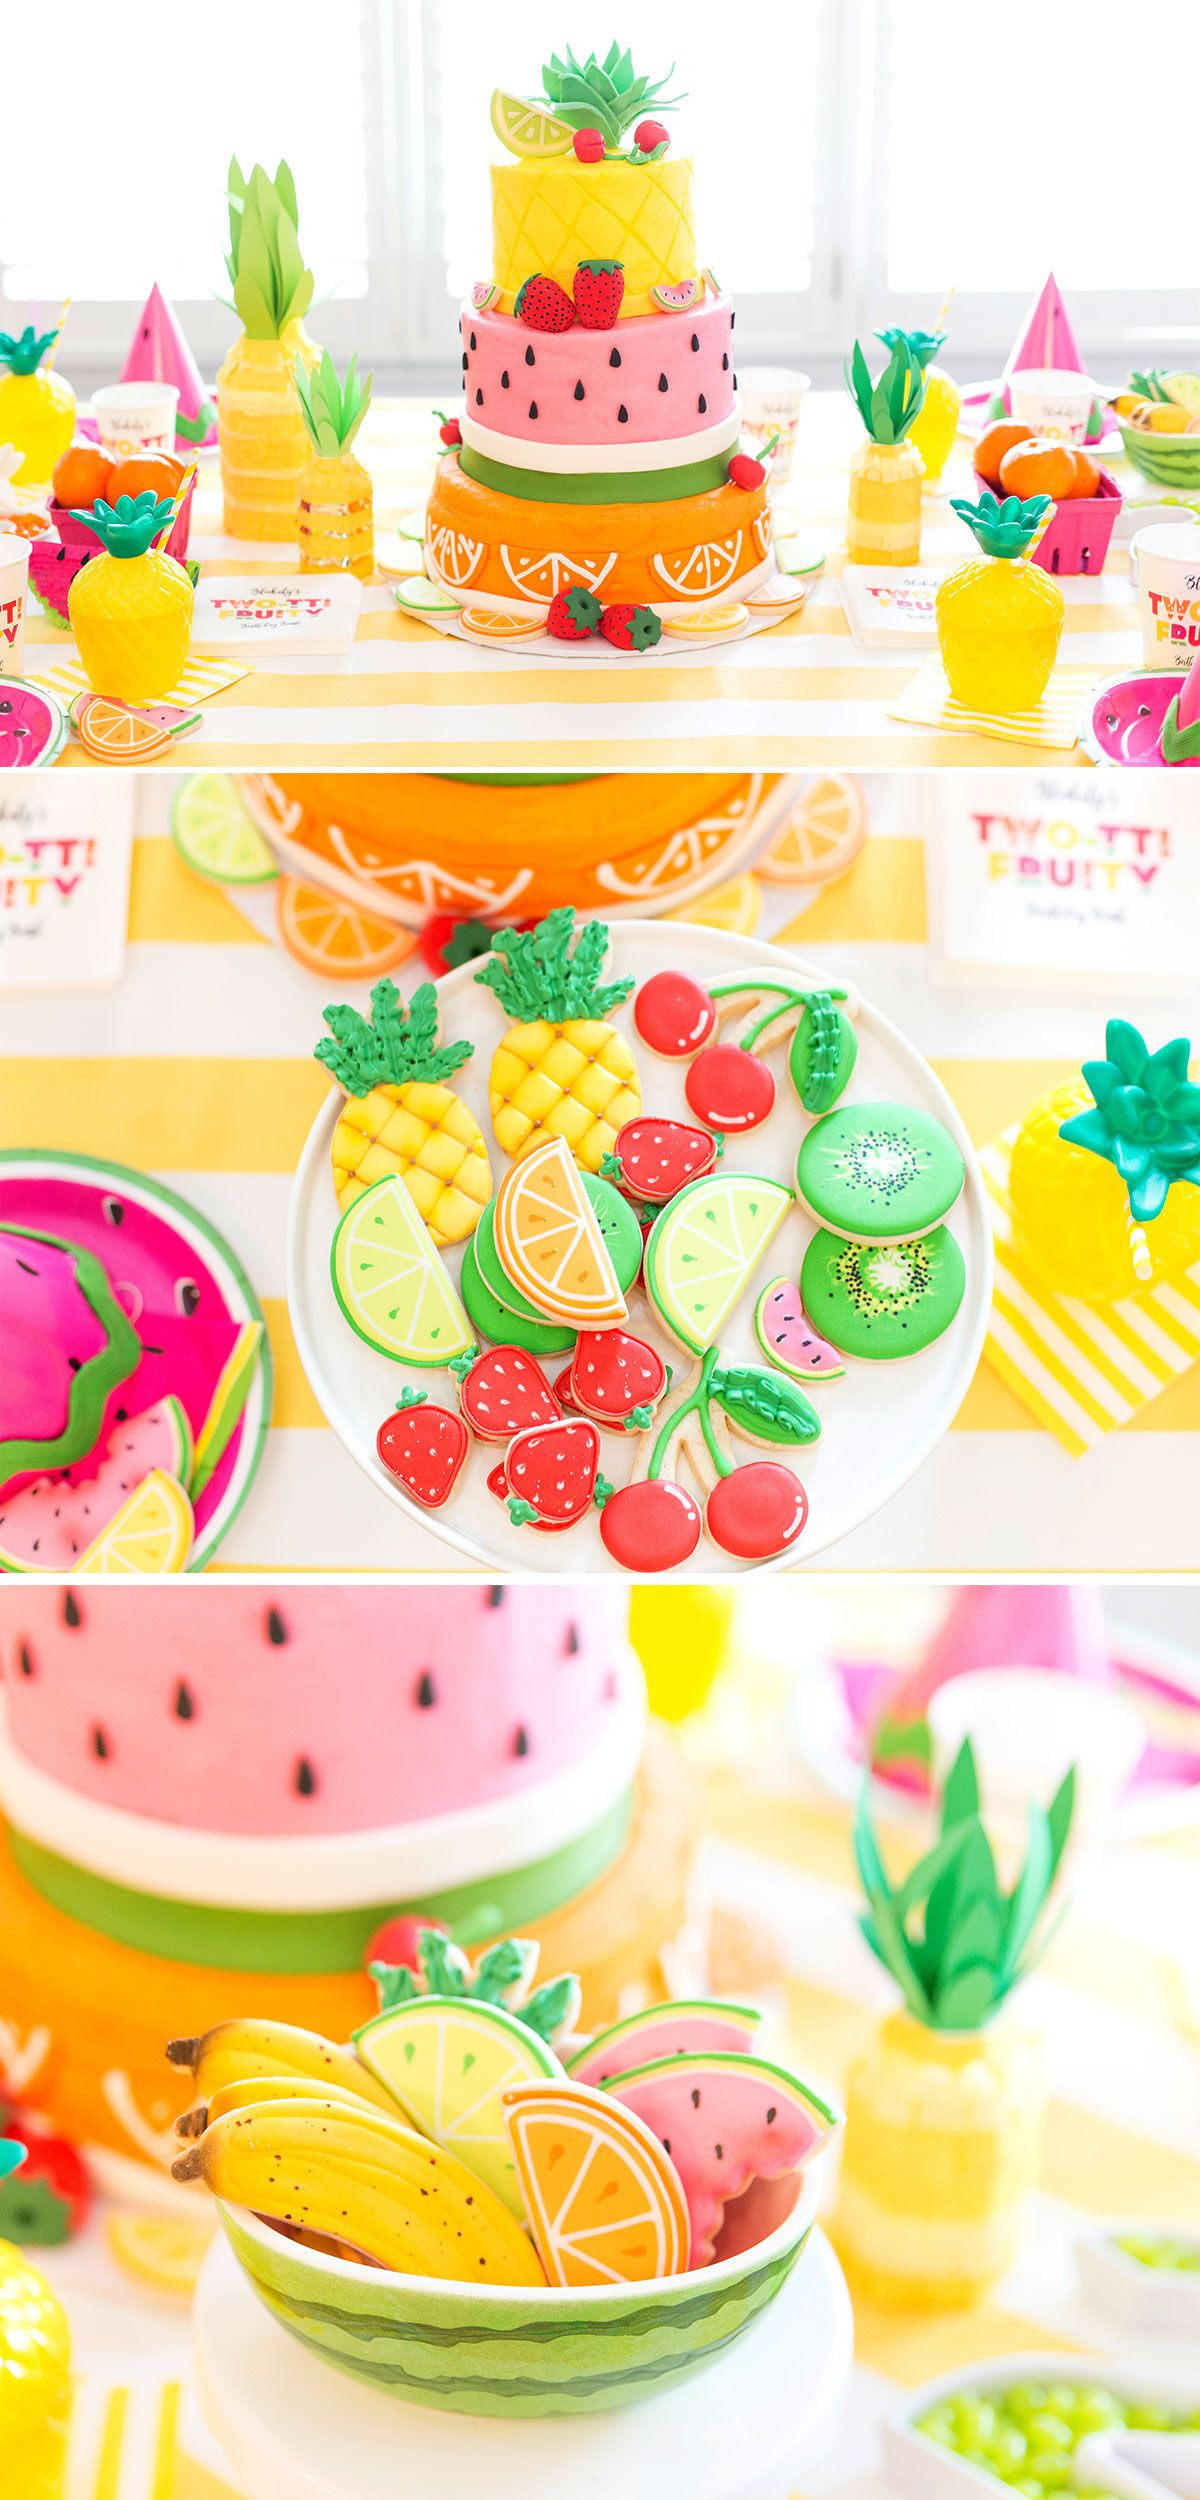 Summer Girl Birthday Party Ideas
 Two tti Fruity Birthday Party Blakely Turns 2